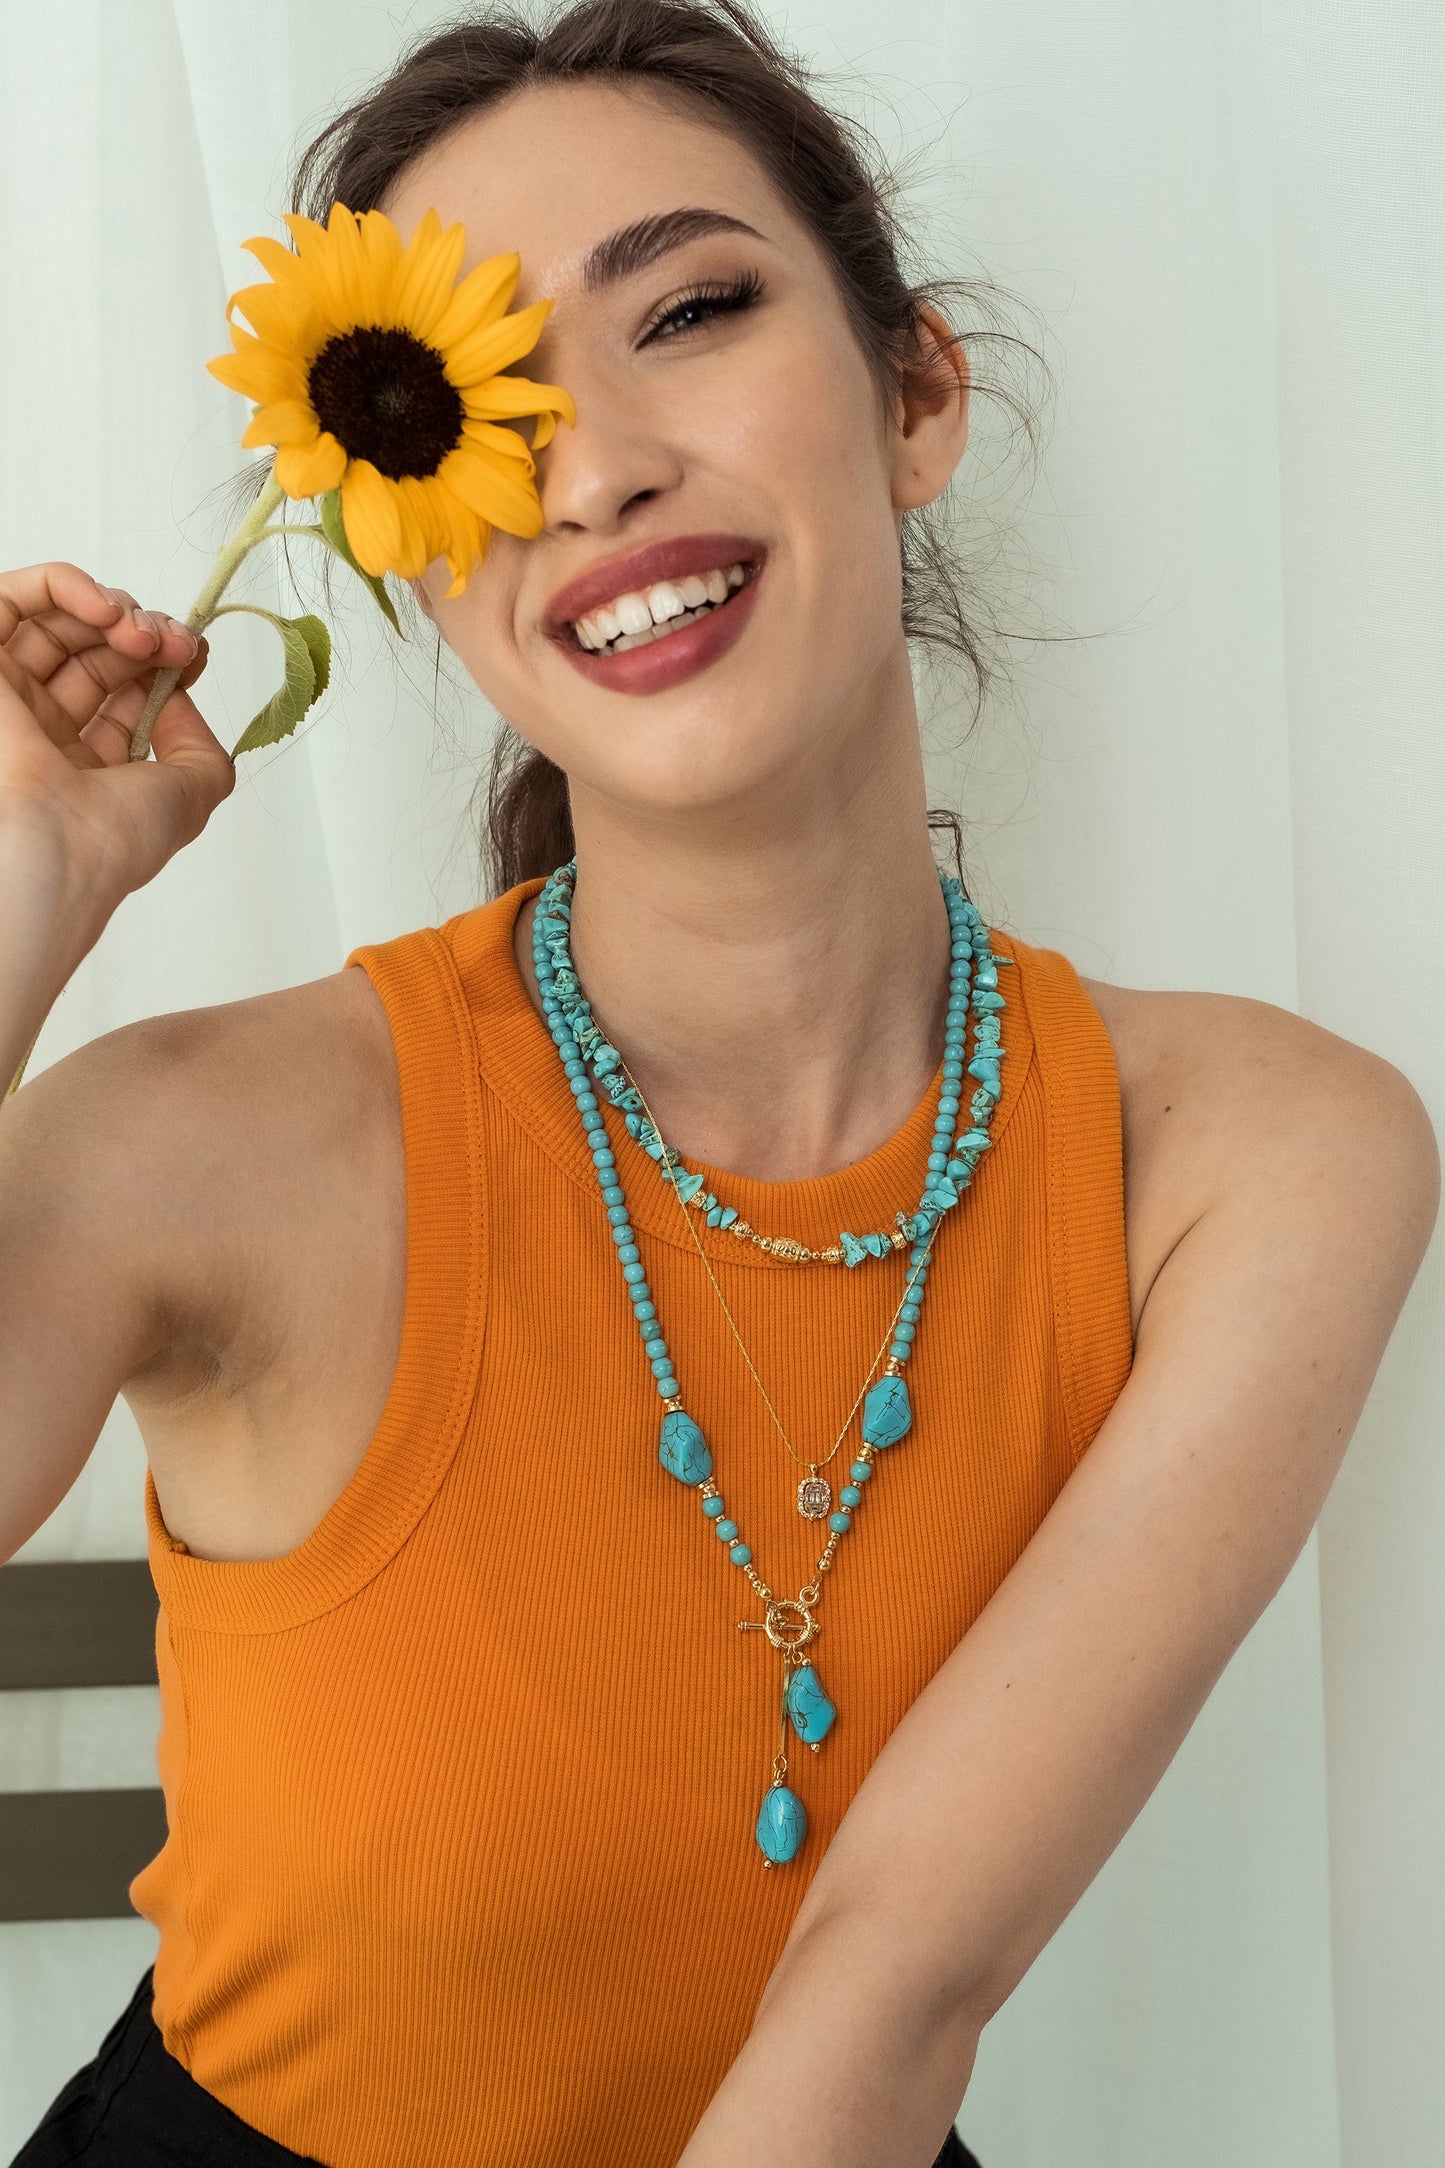 Women Gold-Plated Boho Layered Necklace Set 3Pcs, Turquoise with Beads, Chain with Baguette Pendant, Turquoise Stone Y-Necklace & Stone Pendant, Bohemian Style Trendy & Adjustable Fashion Jewelry